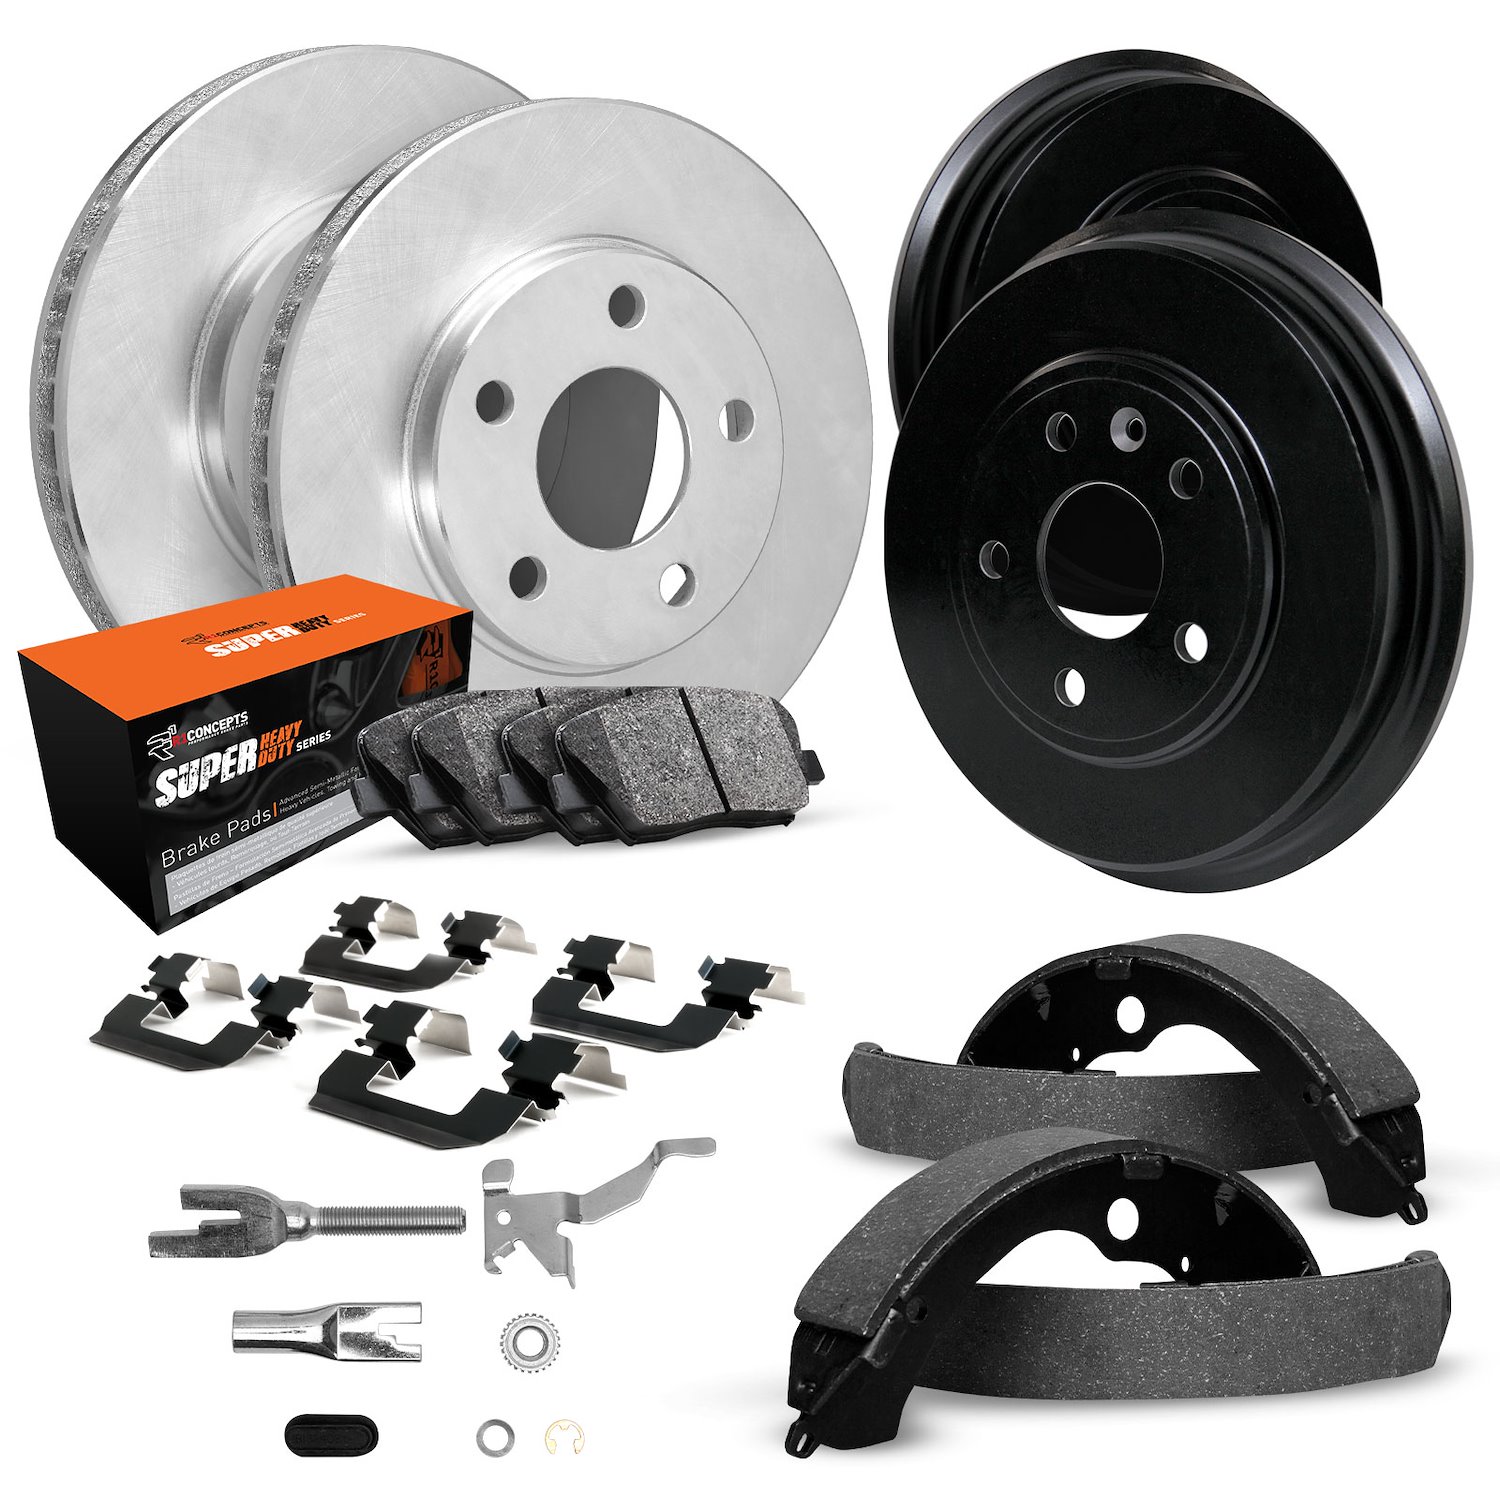 E-Line Blank Brake Rotor & Drum Set w/Super-Duty Pads, Shoes, Hardware, & Adjusters, 1979-1979 GM, Position: Front & Rear